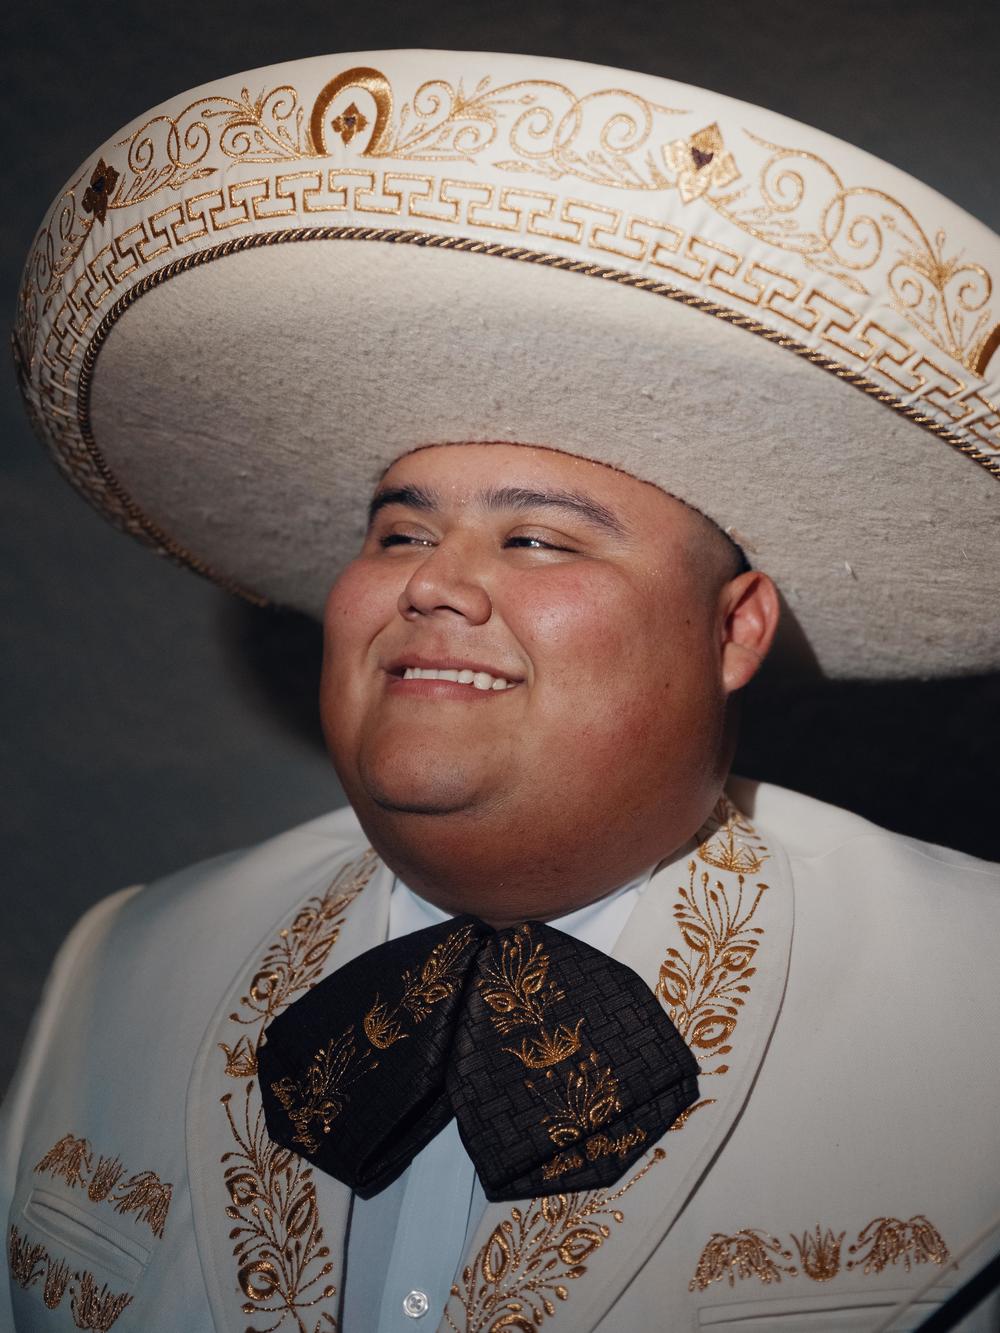 A member of Mariachi Los Reyes, poses for a photo at the MARIACHI USA festival in June.